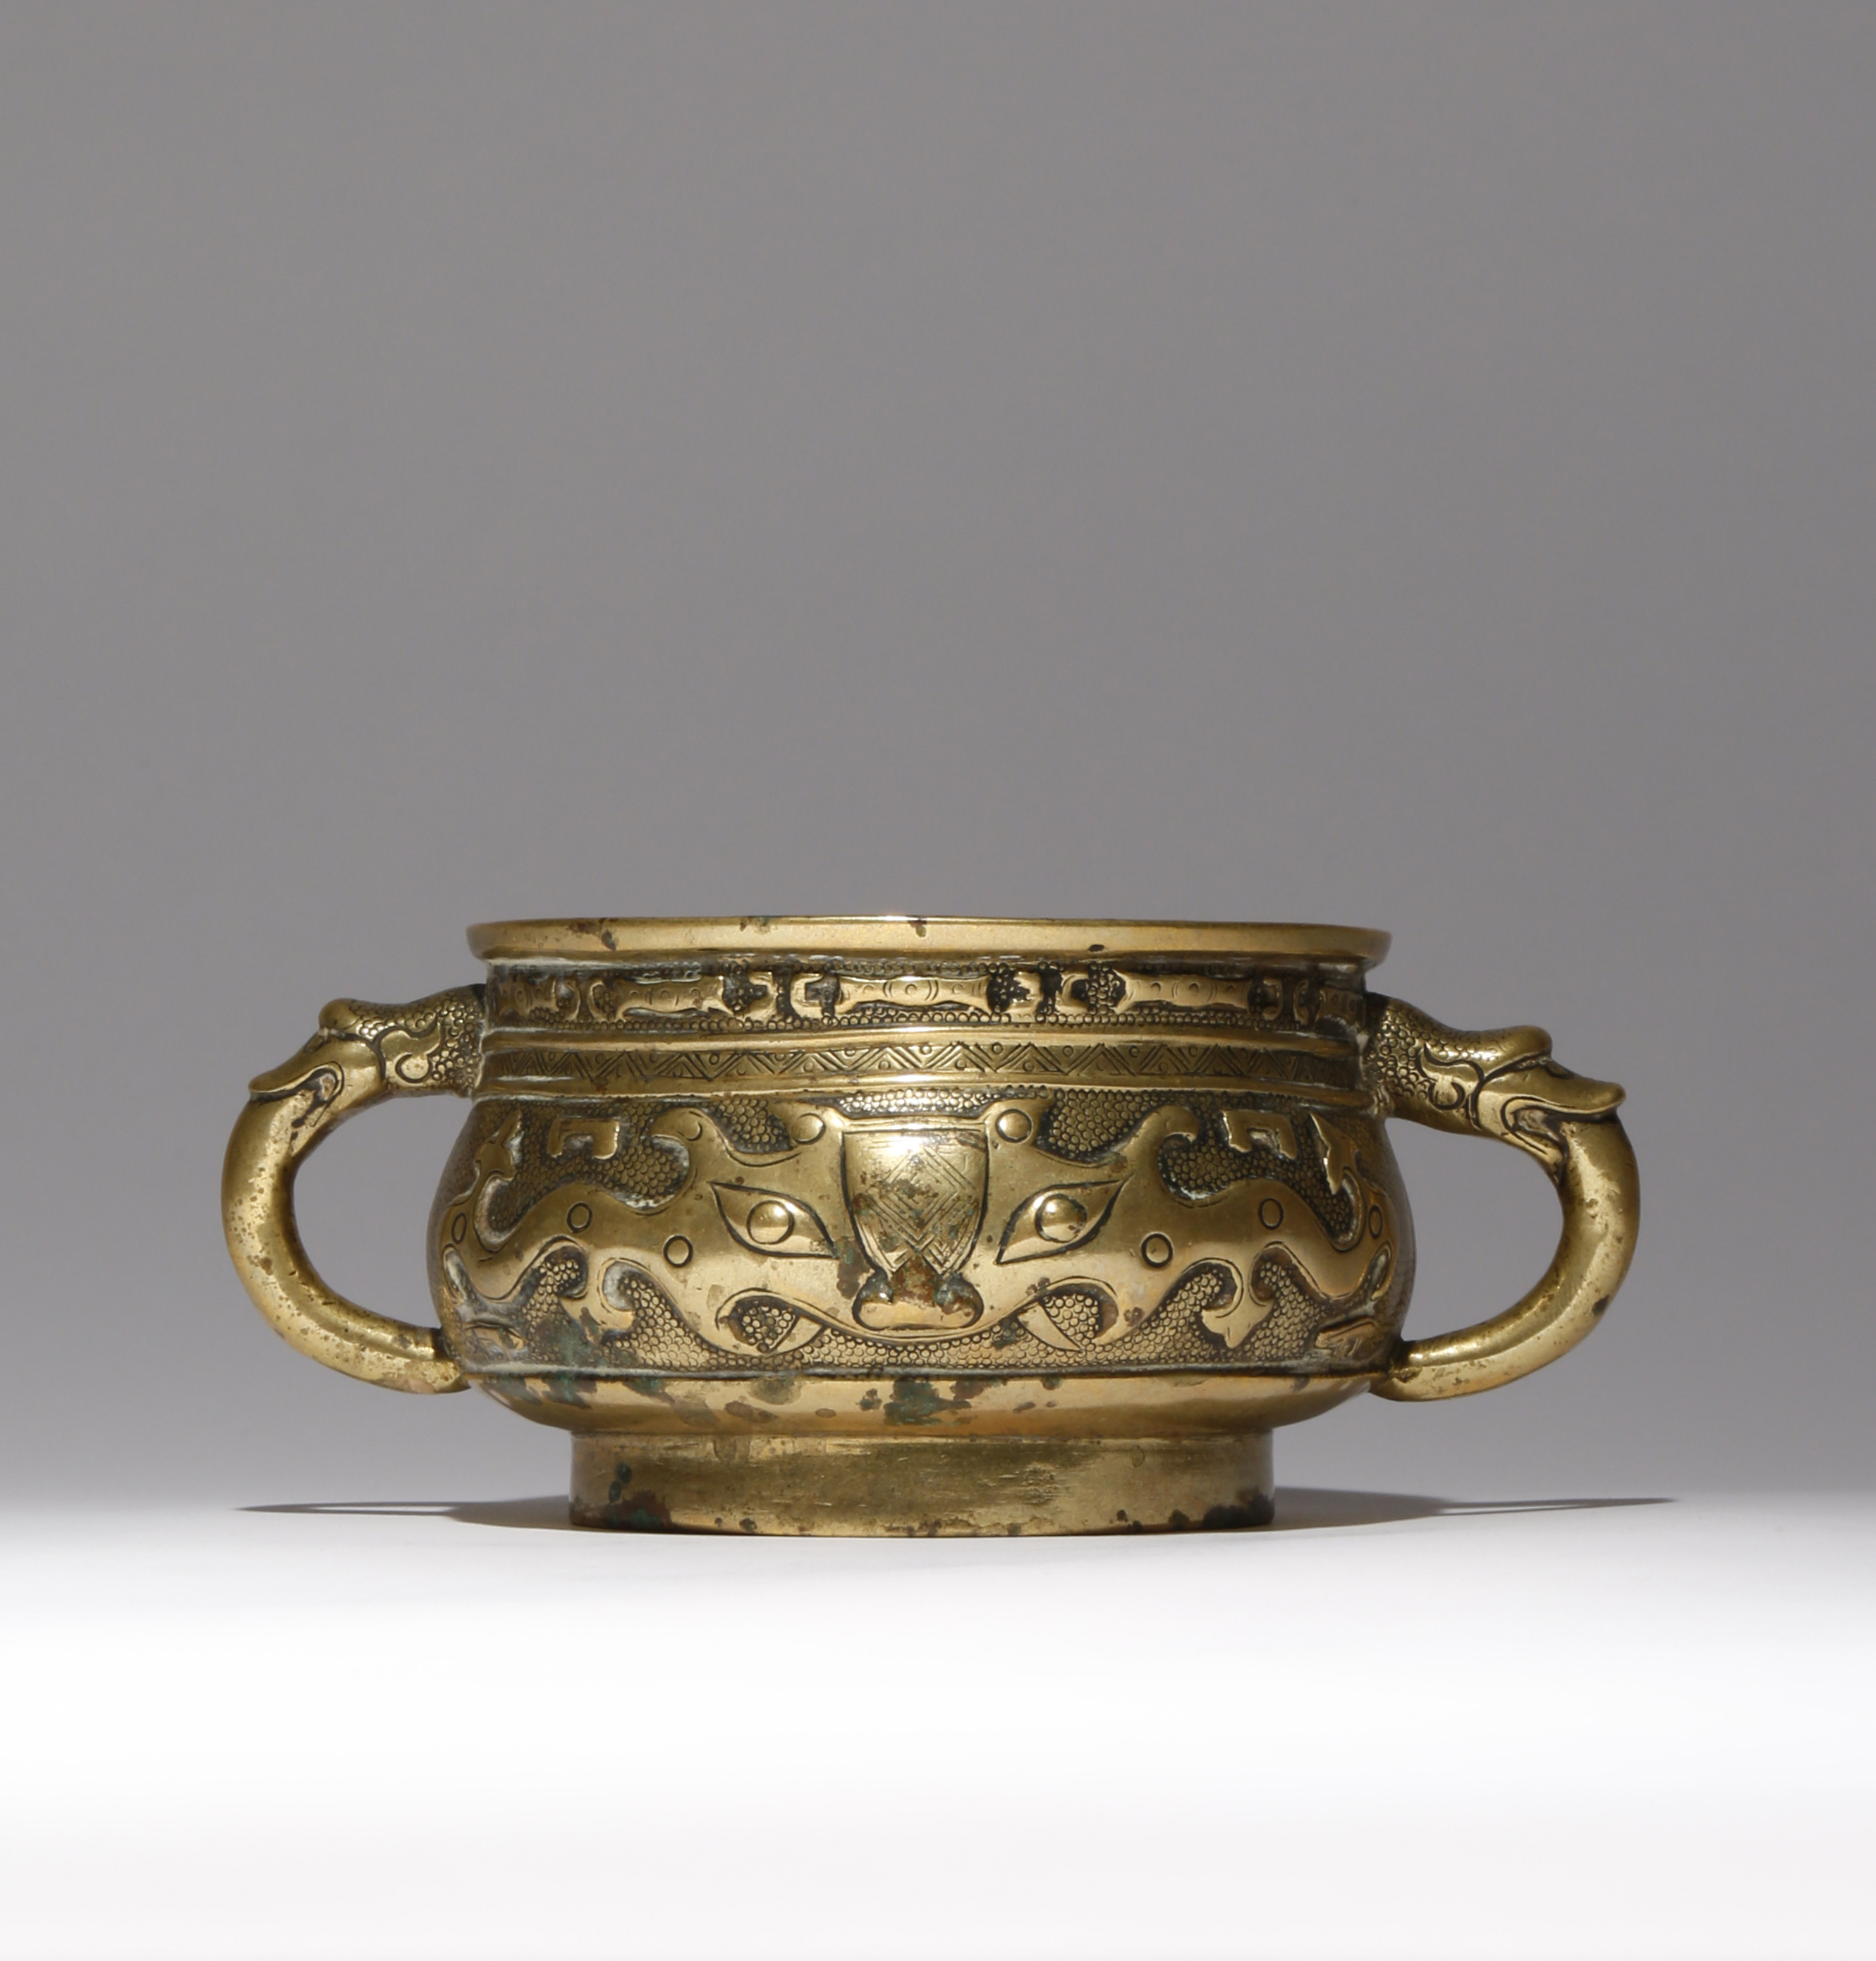 A CHINESE BRONZE INCENSE BURNER QING DYNASTY The bombé-shaped body cast in relief with archaistic